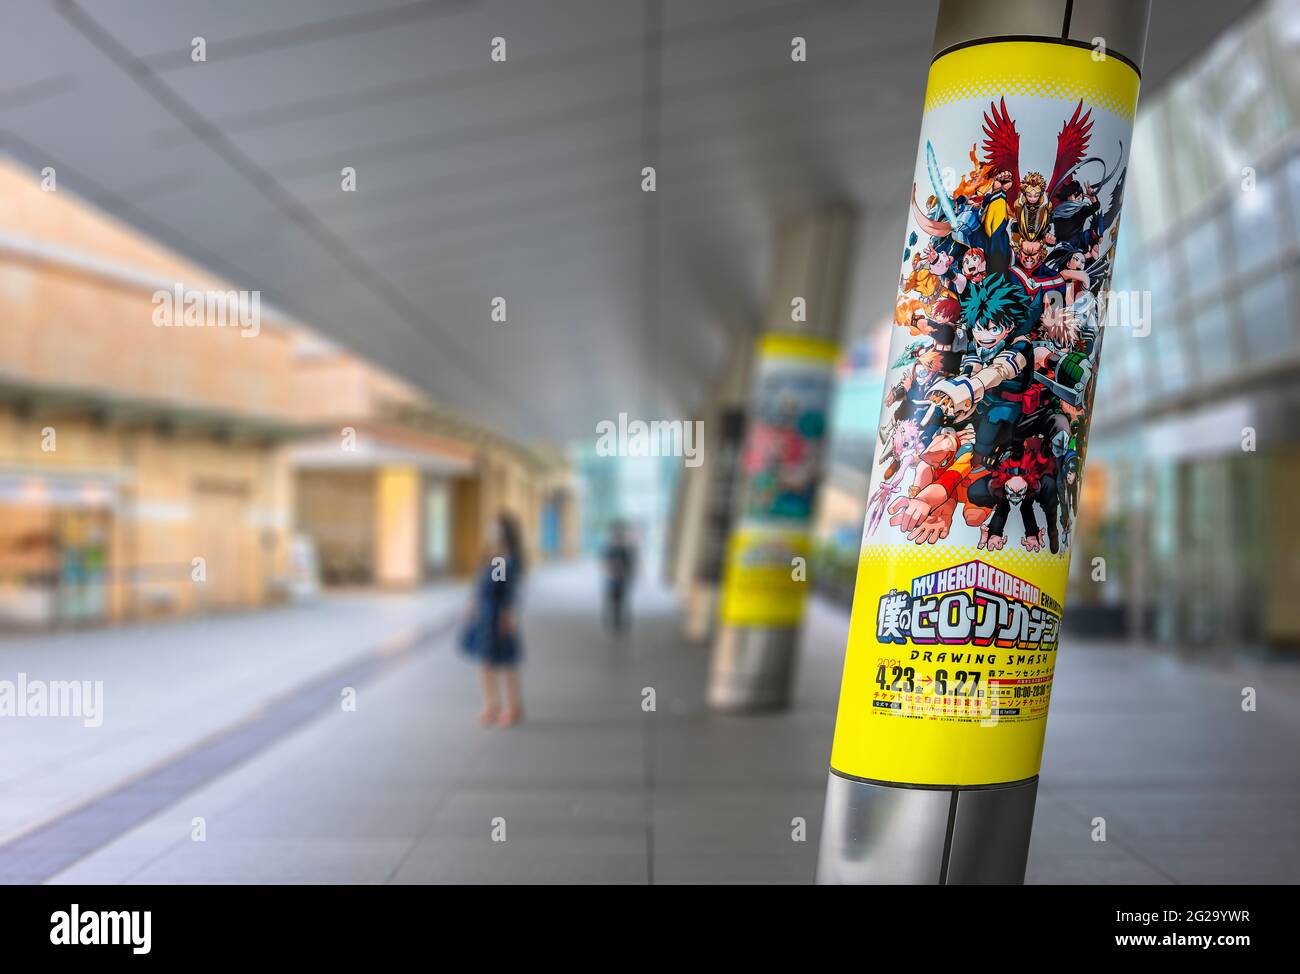 tokyo, japan - june 03 2021: Japanese advertising poster of the exhibition  drawing smash of manga and anime series My Hero Academia on a pillar of the  Stock Photo - Alamy